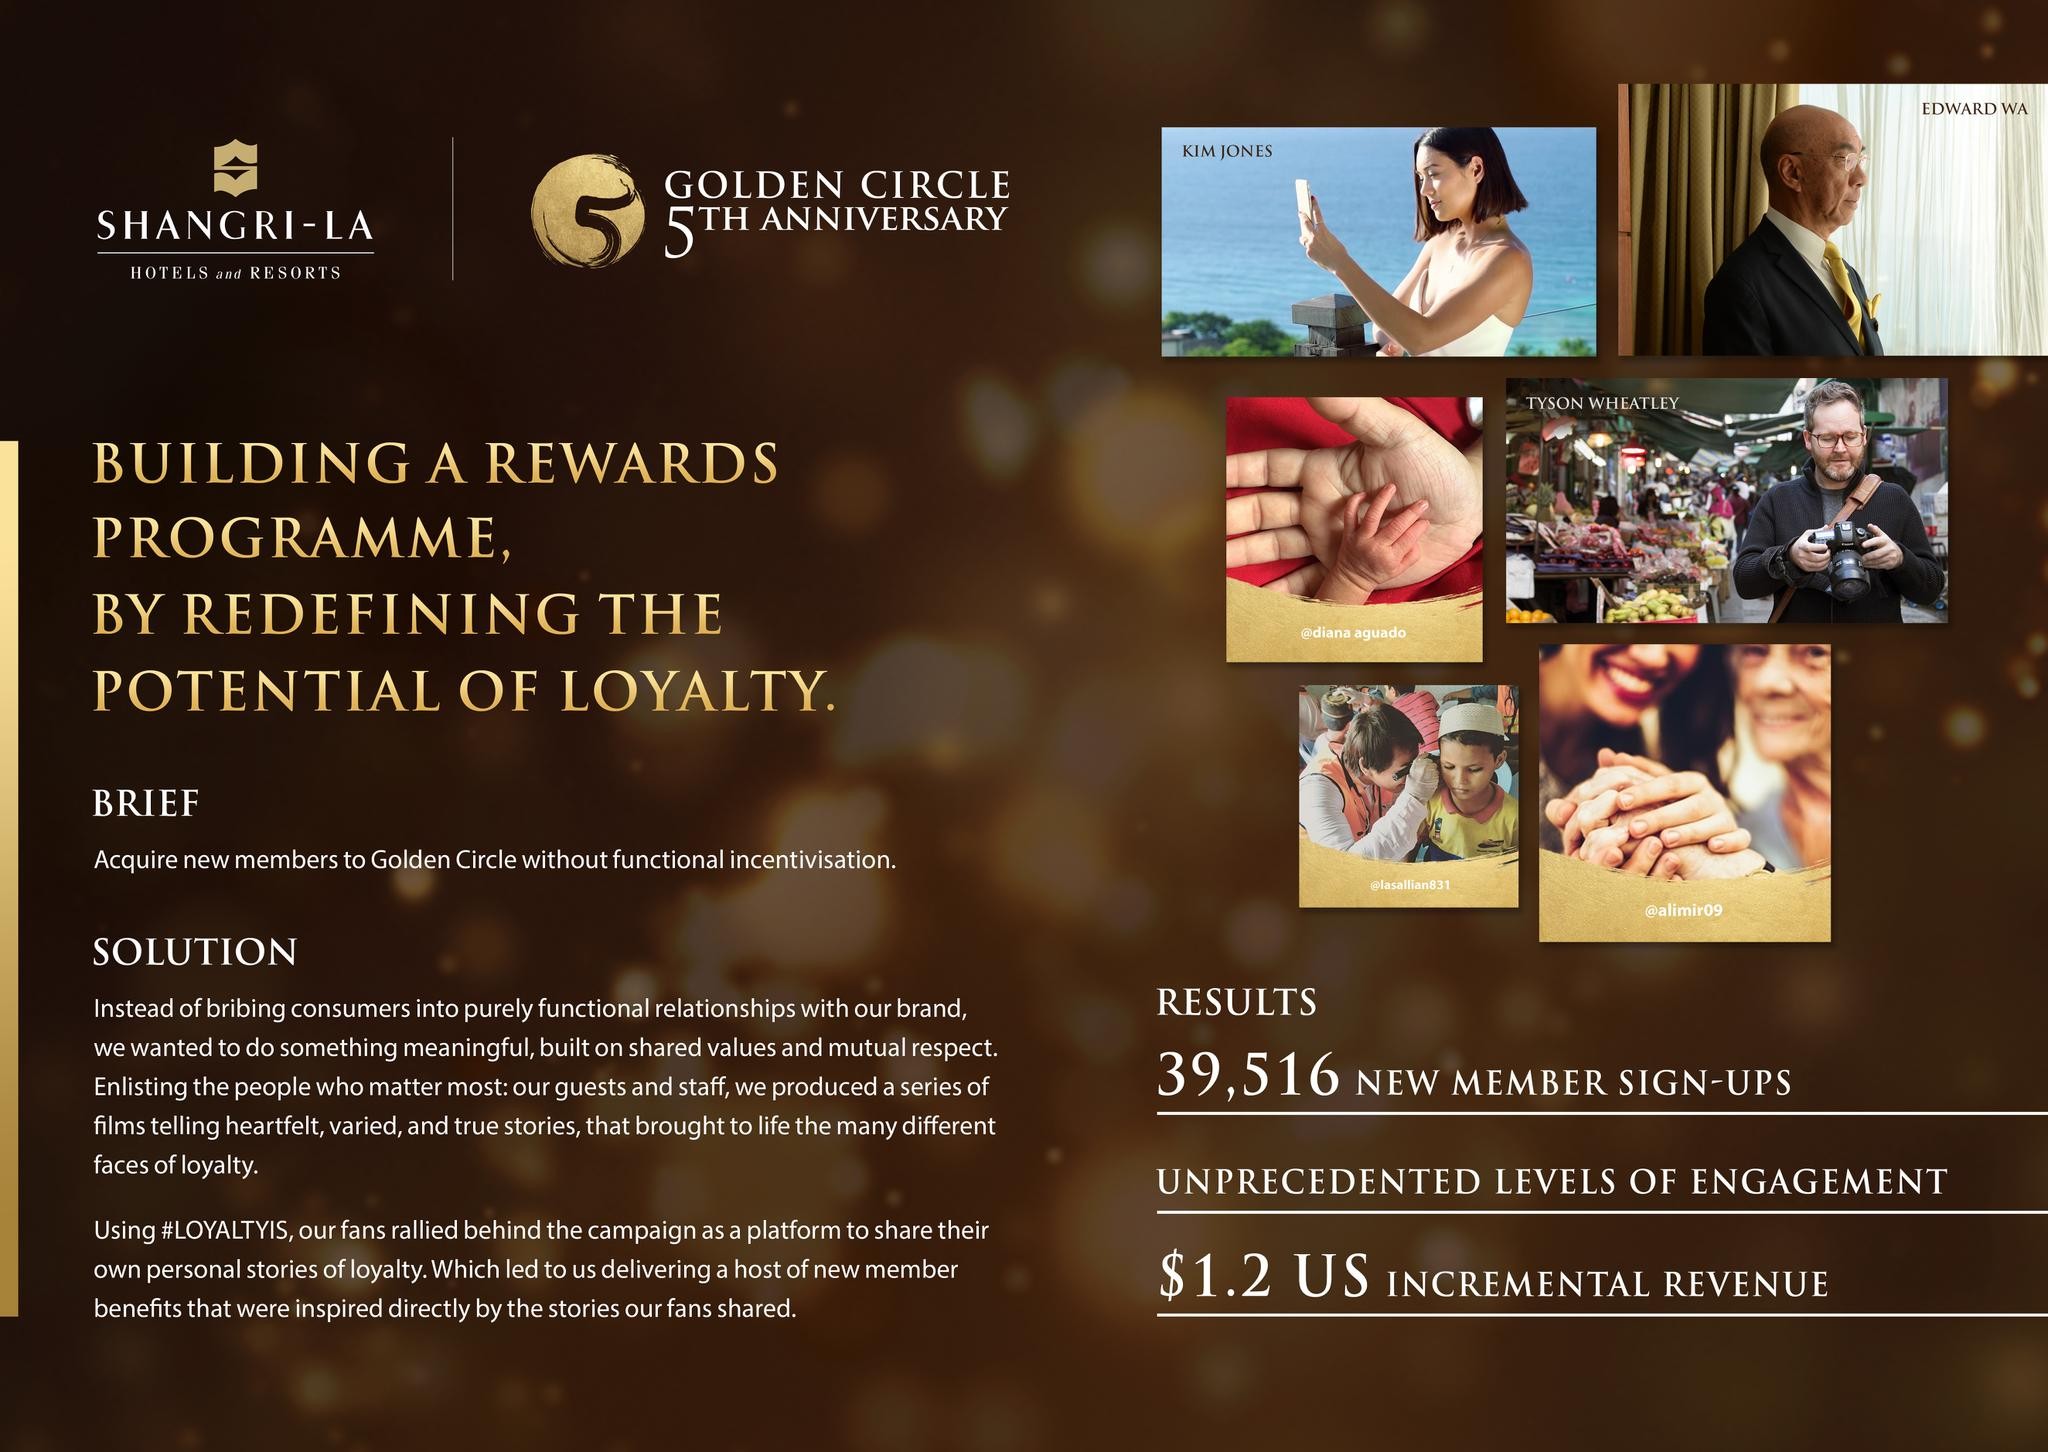 #LoyaltyIs - Golden Circle 5th Anniversary Campaign